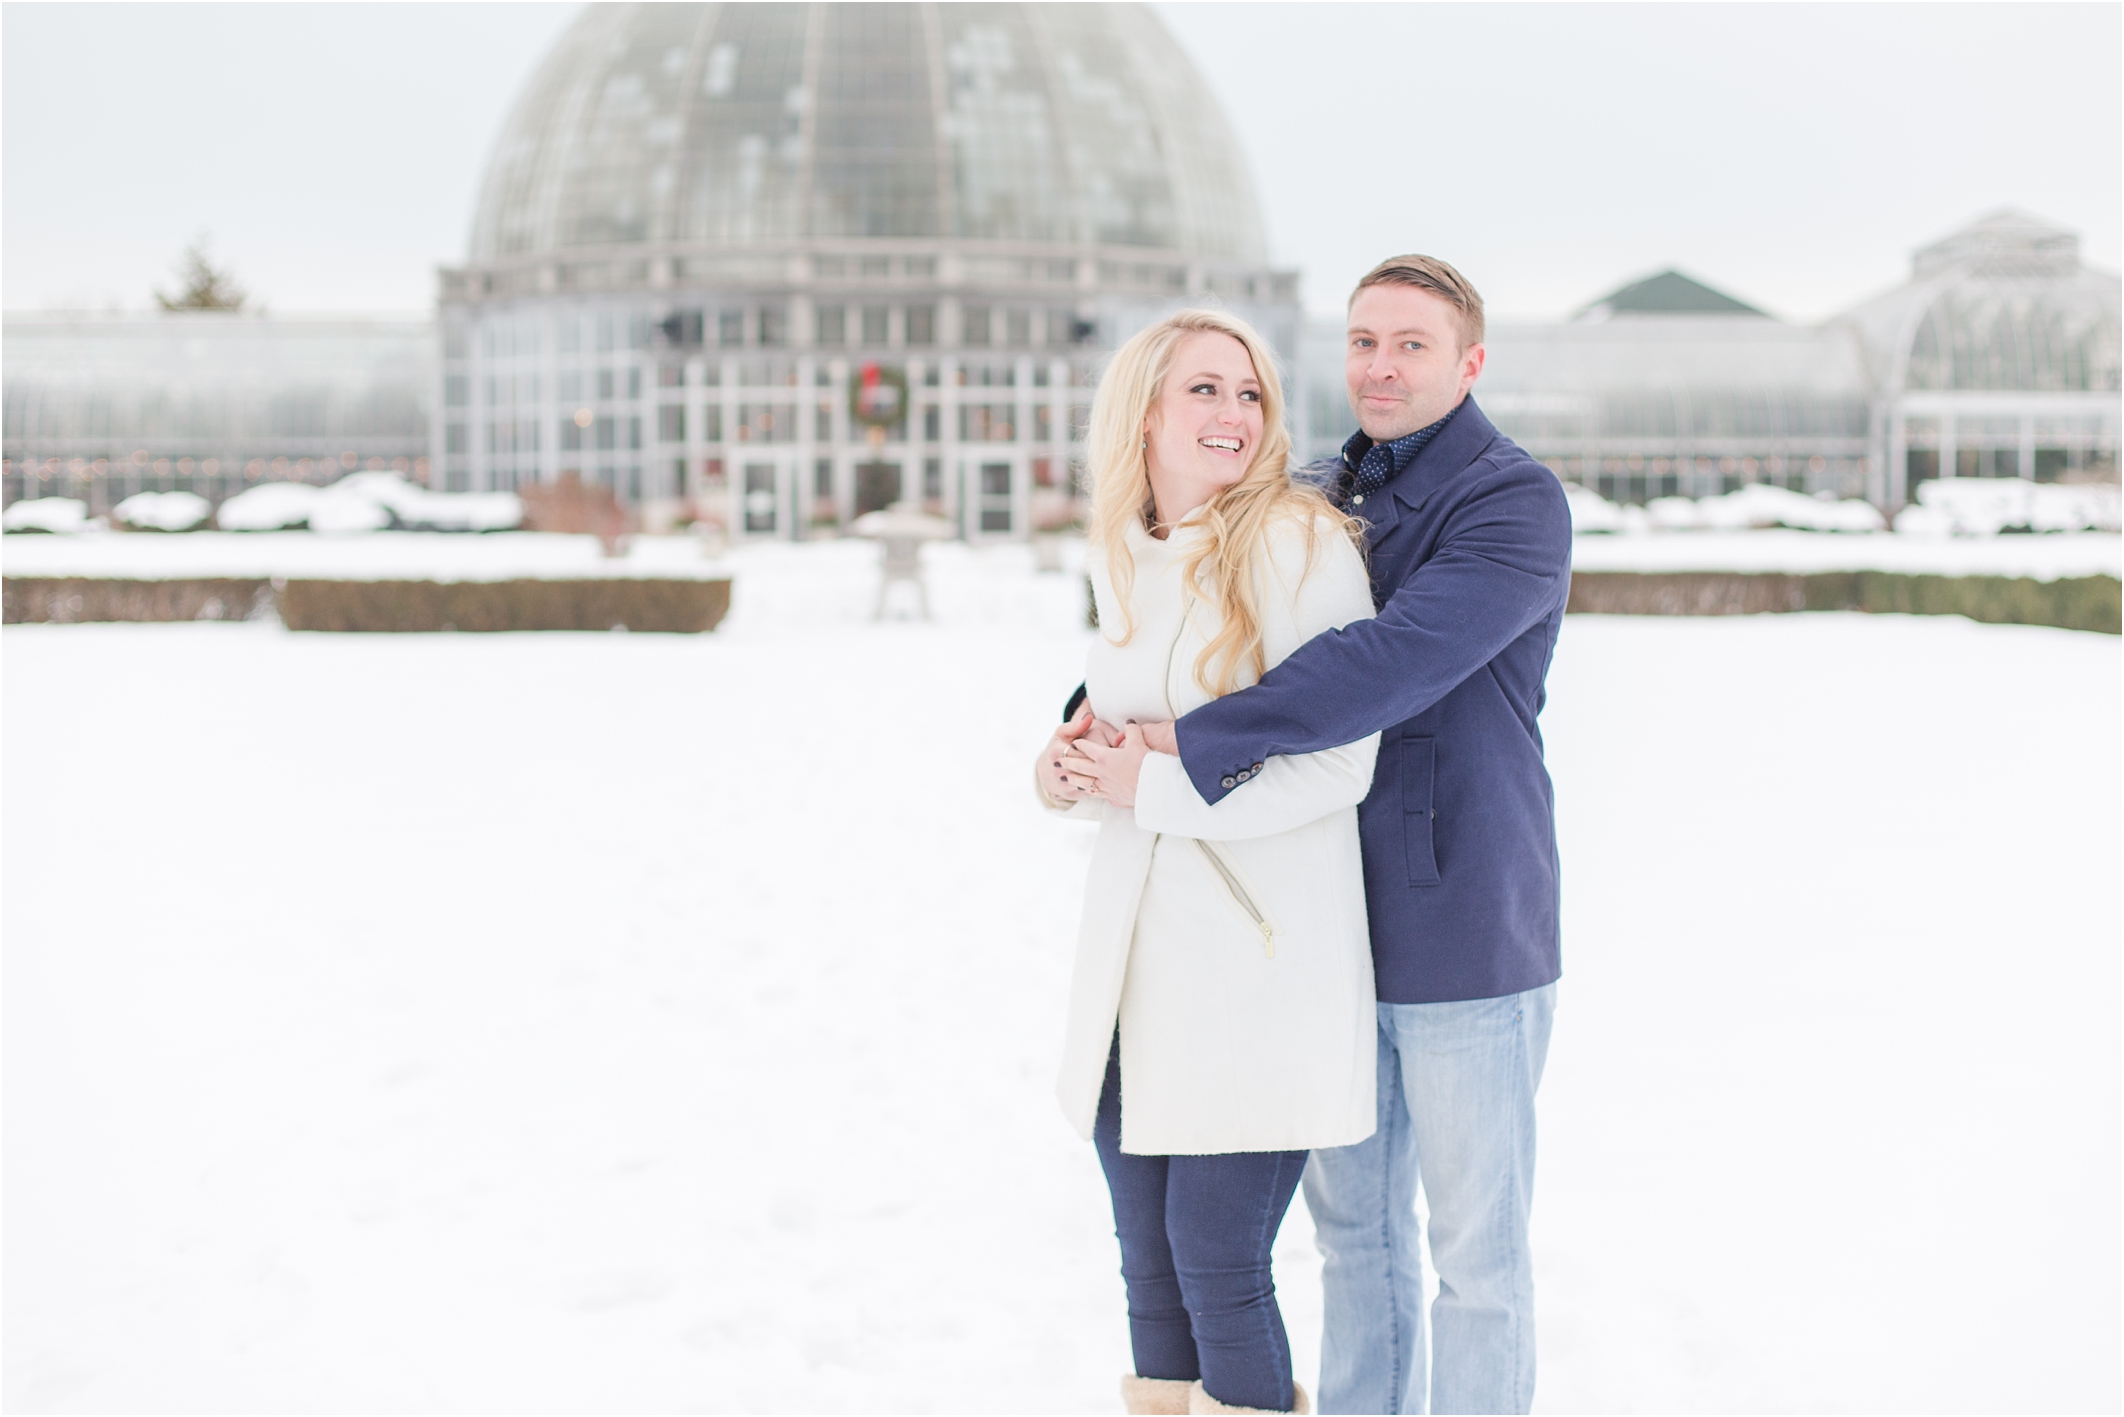 elegant-classic-belle-isle-conservatory-engagement-photos-in-detroit-mi-by-courtney-carolyn-photography_0037.jpg